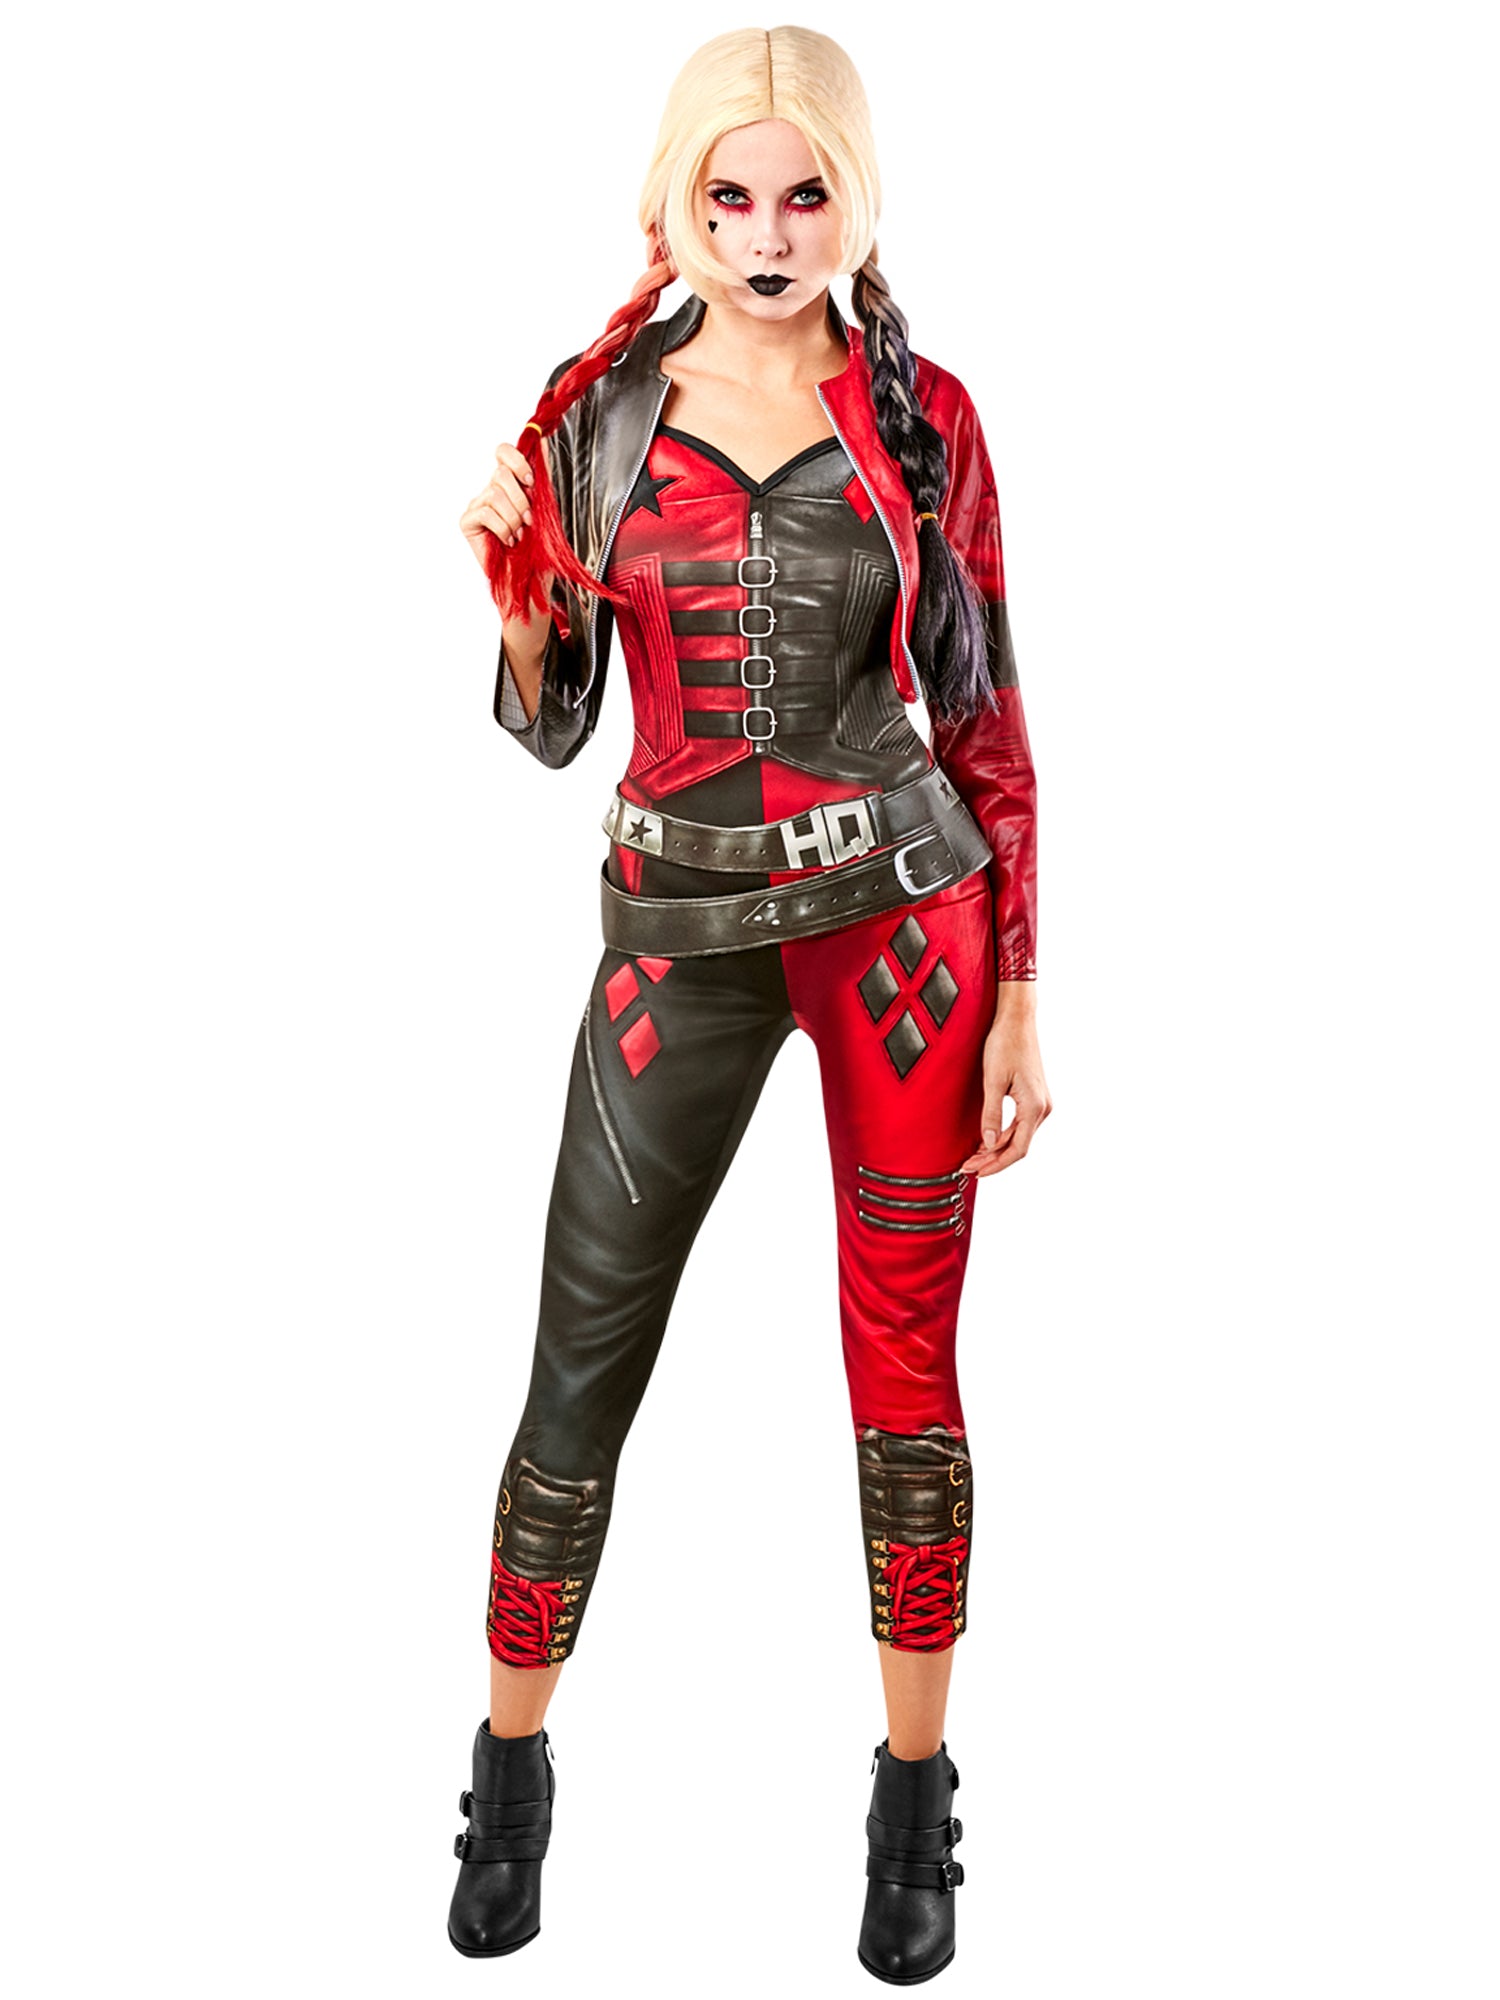 Harley Quinn, Suicide Squad 2, Suicide Squad, Suicide Squad 2, Multi, DC, Adult Costume, Extra Small, Front